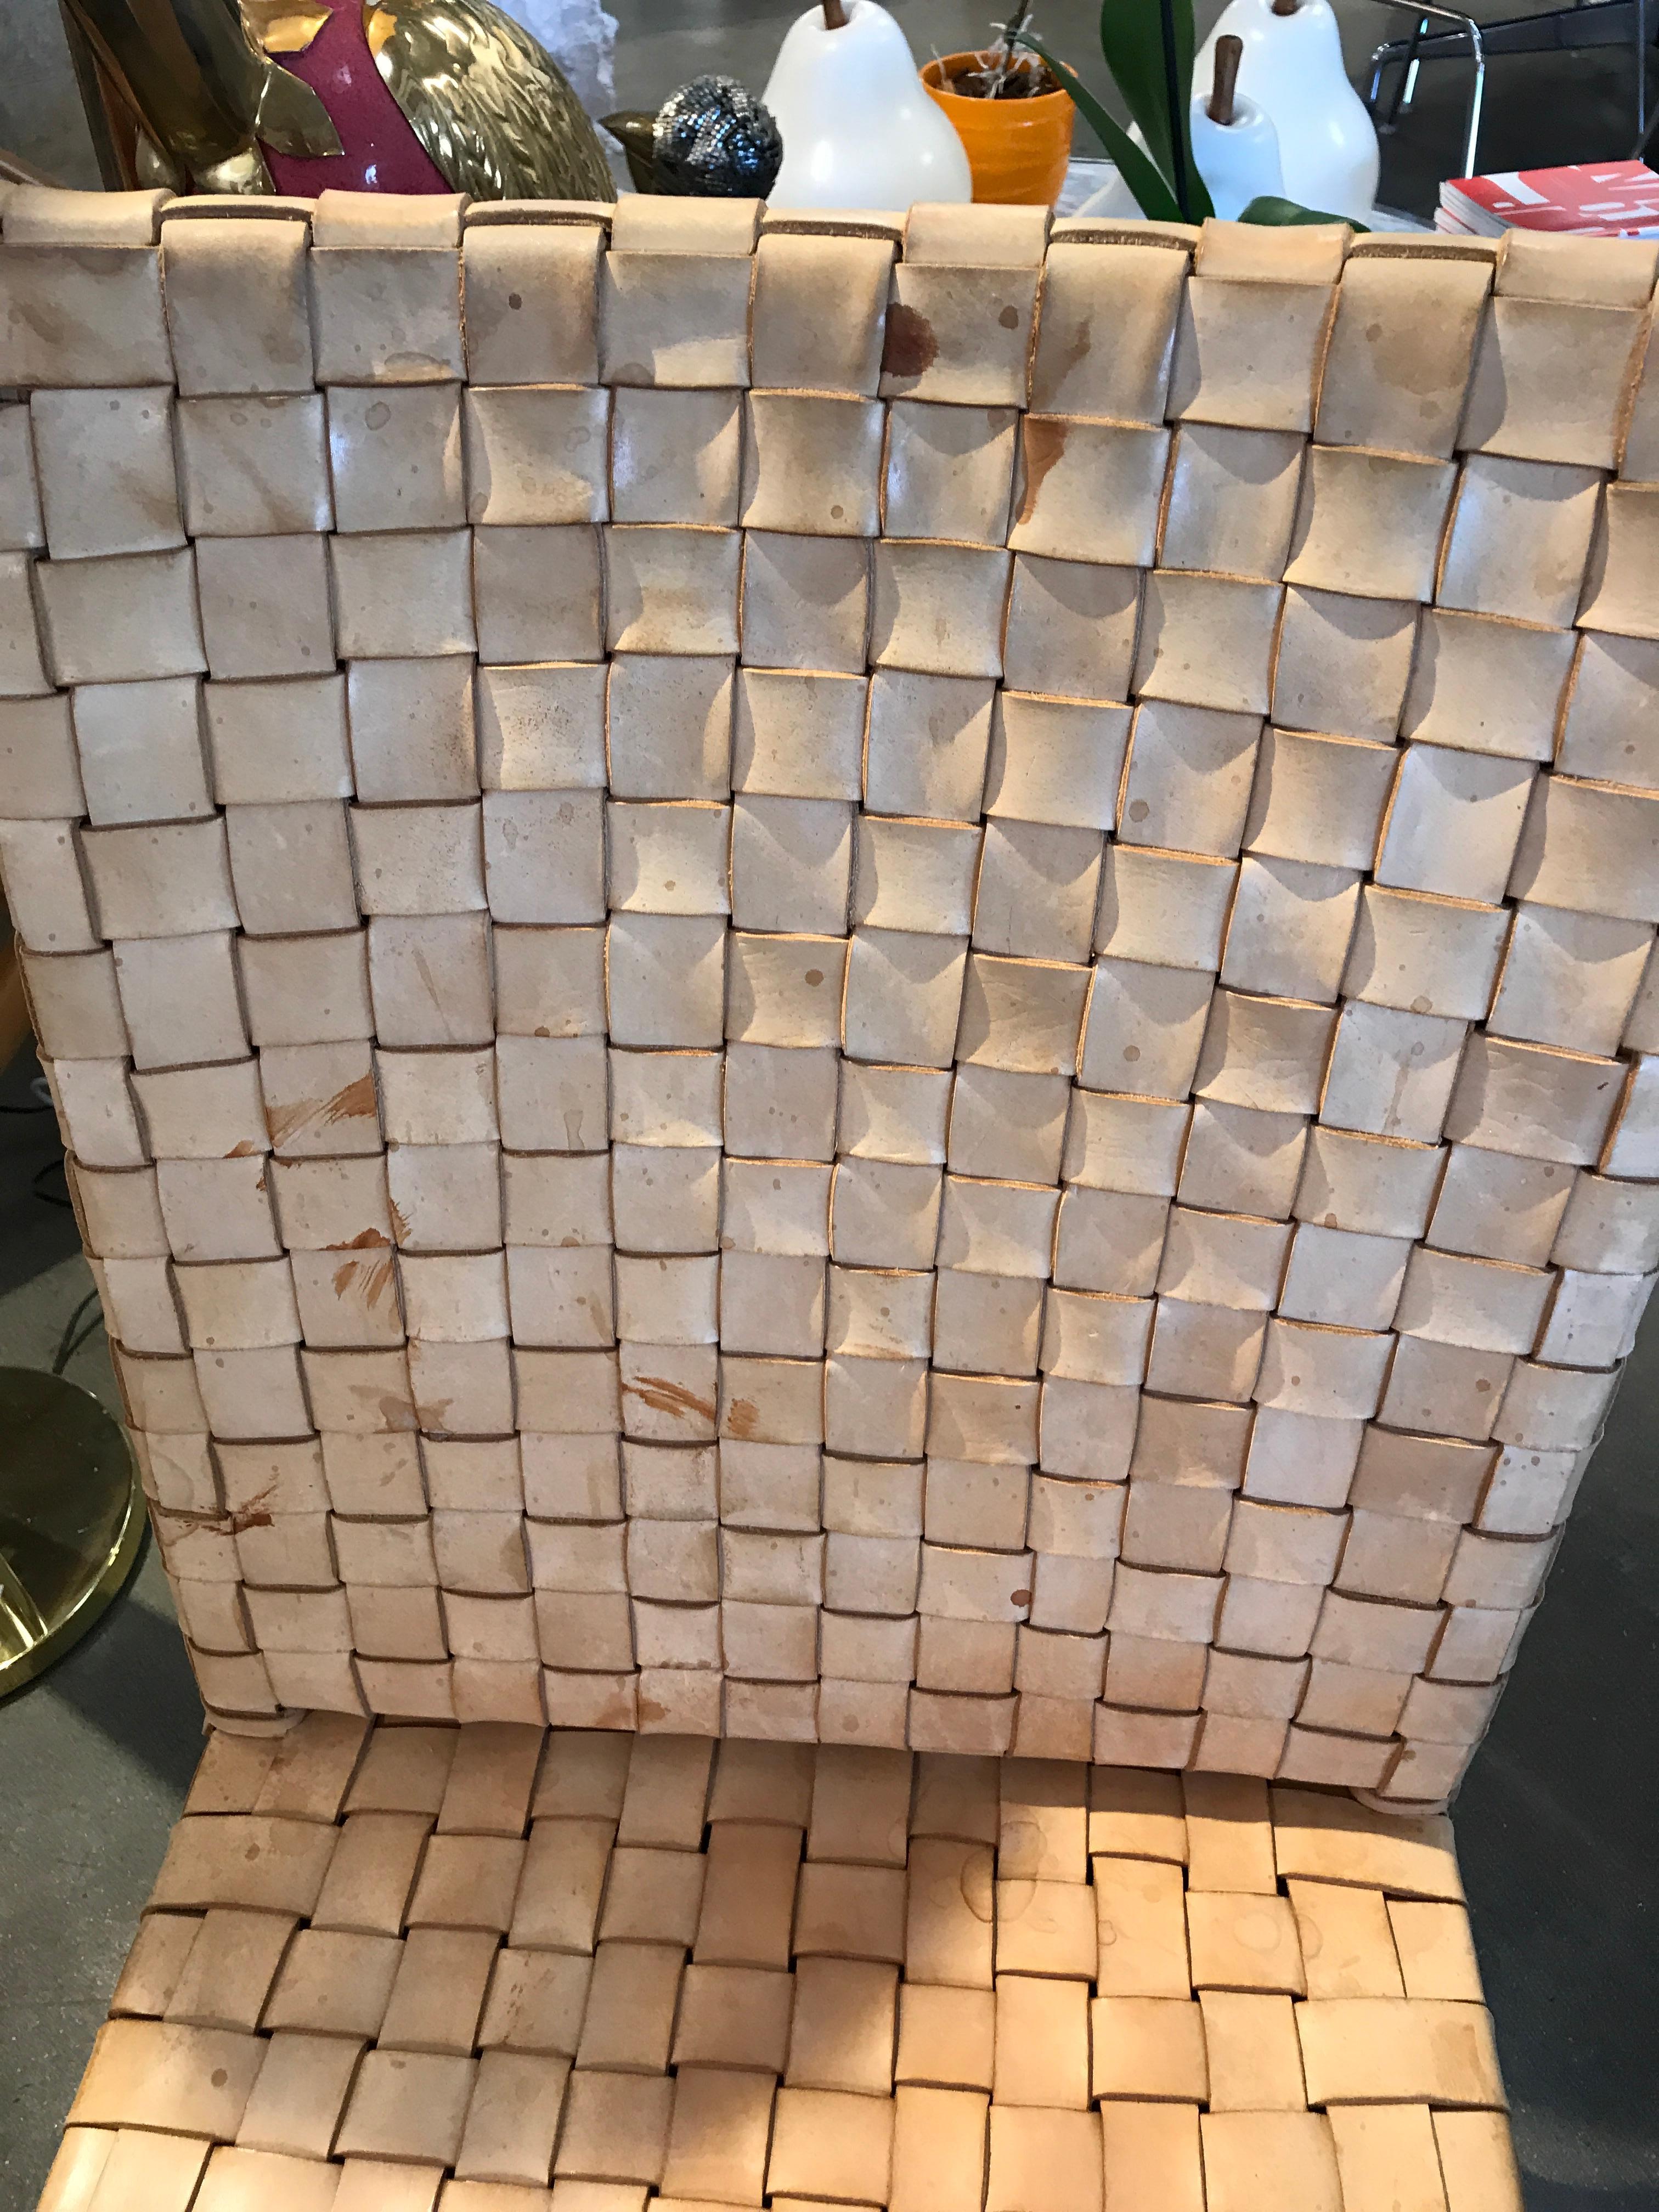 A nicely made woven thick leather strip chair sold by Ralph Lauren. The leather has some discoloration and the legs have been retouched. The leather has scuffs and signs of use. Nicely made with a tacked duvet bottom.